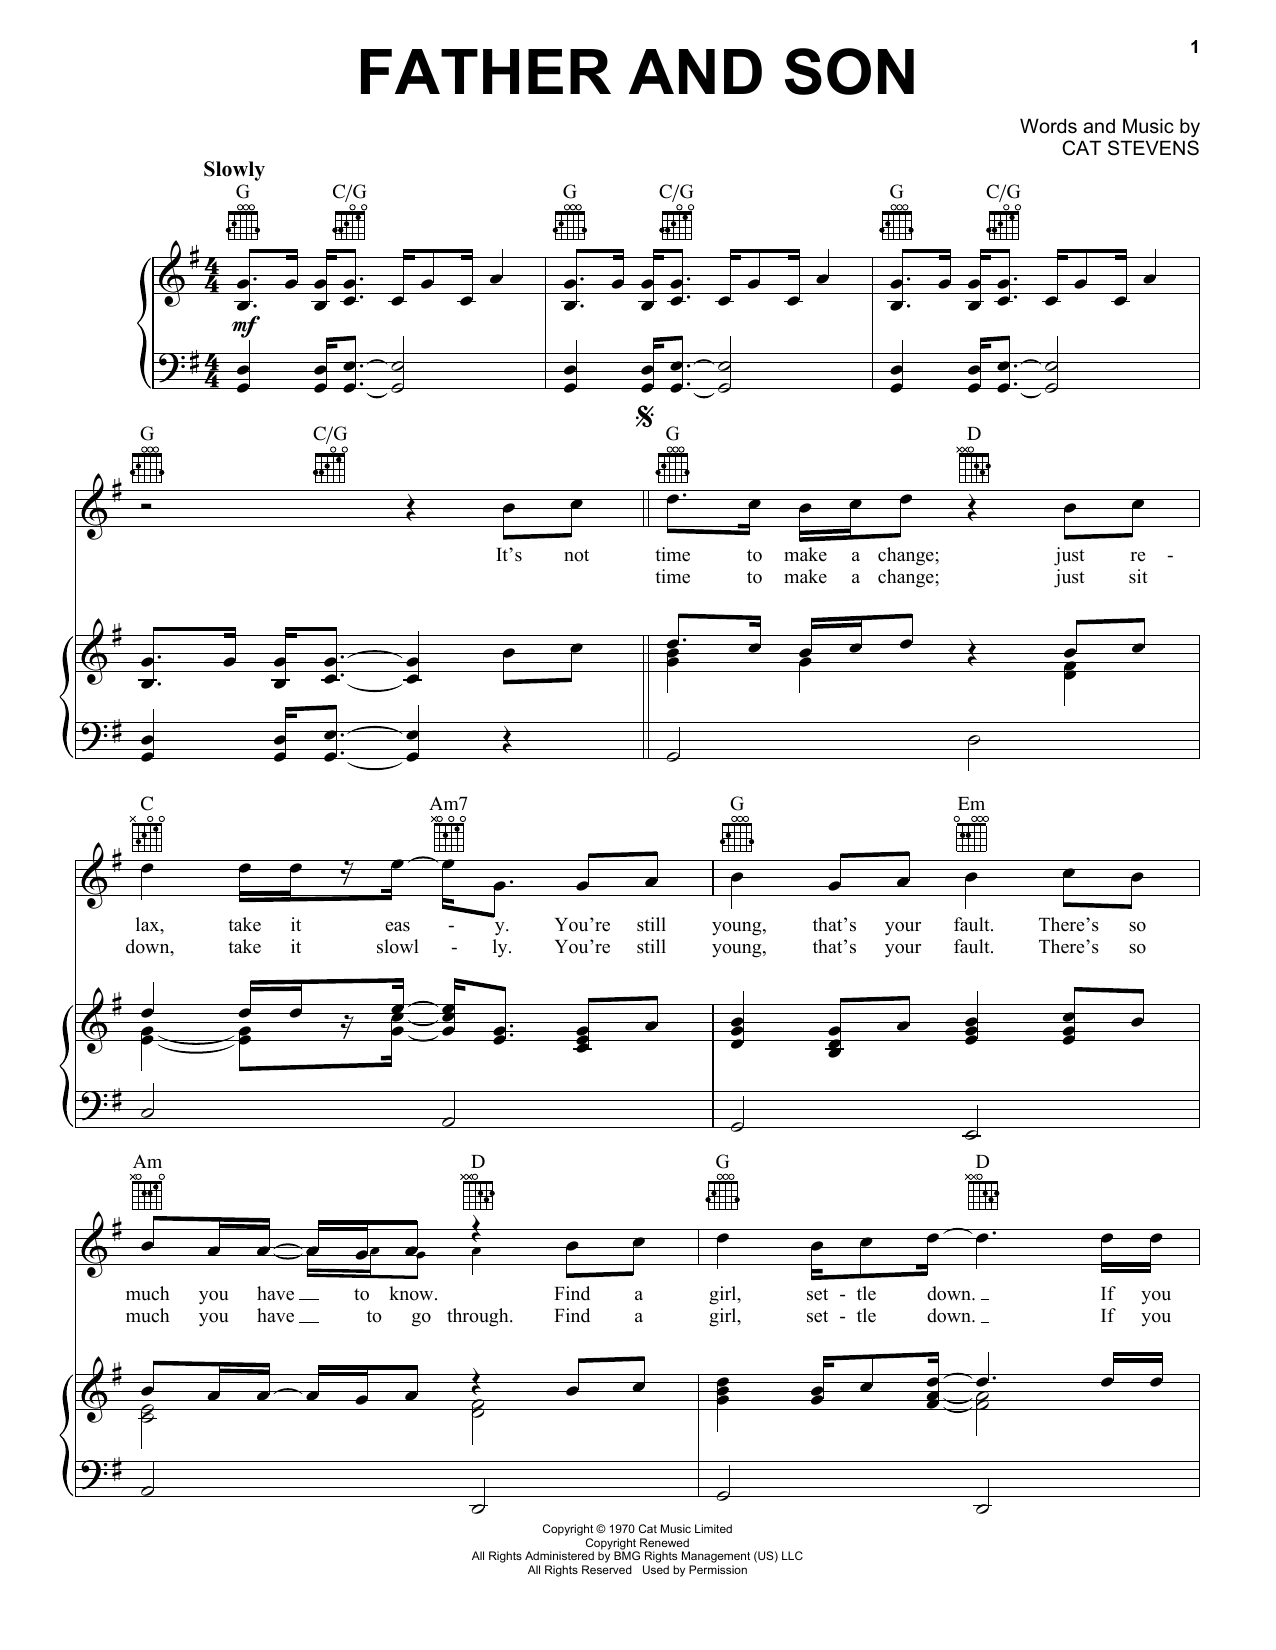 Download Cat Stevens Father And Son Sheet Music